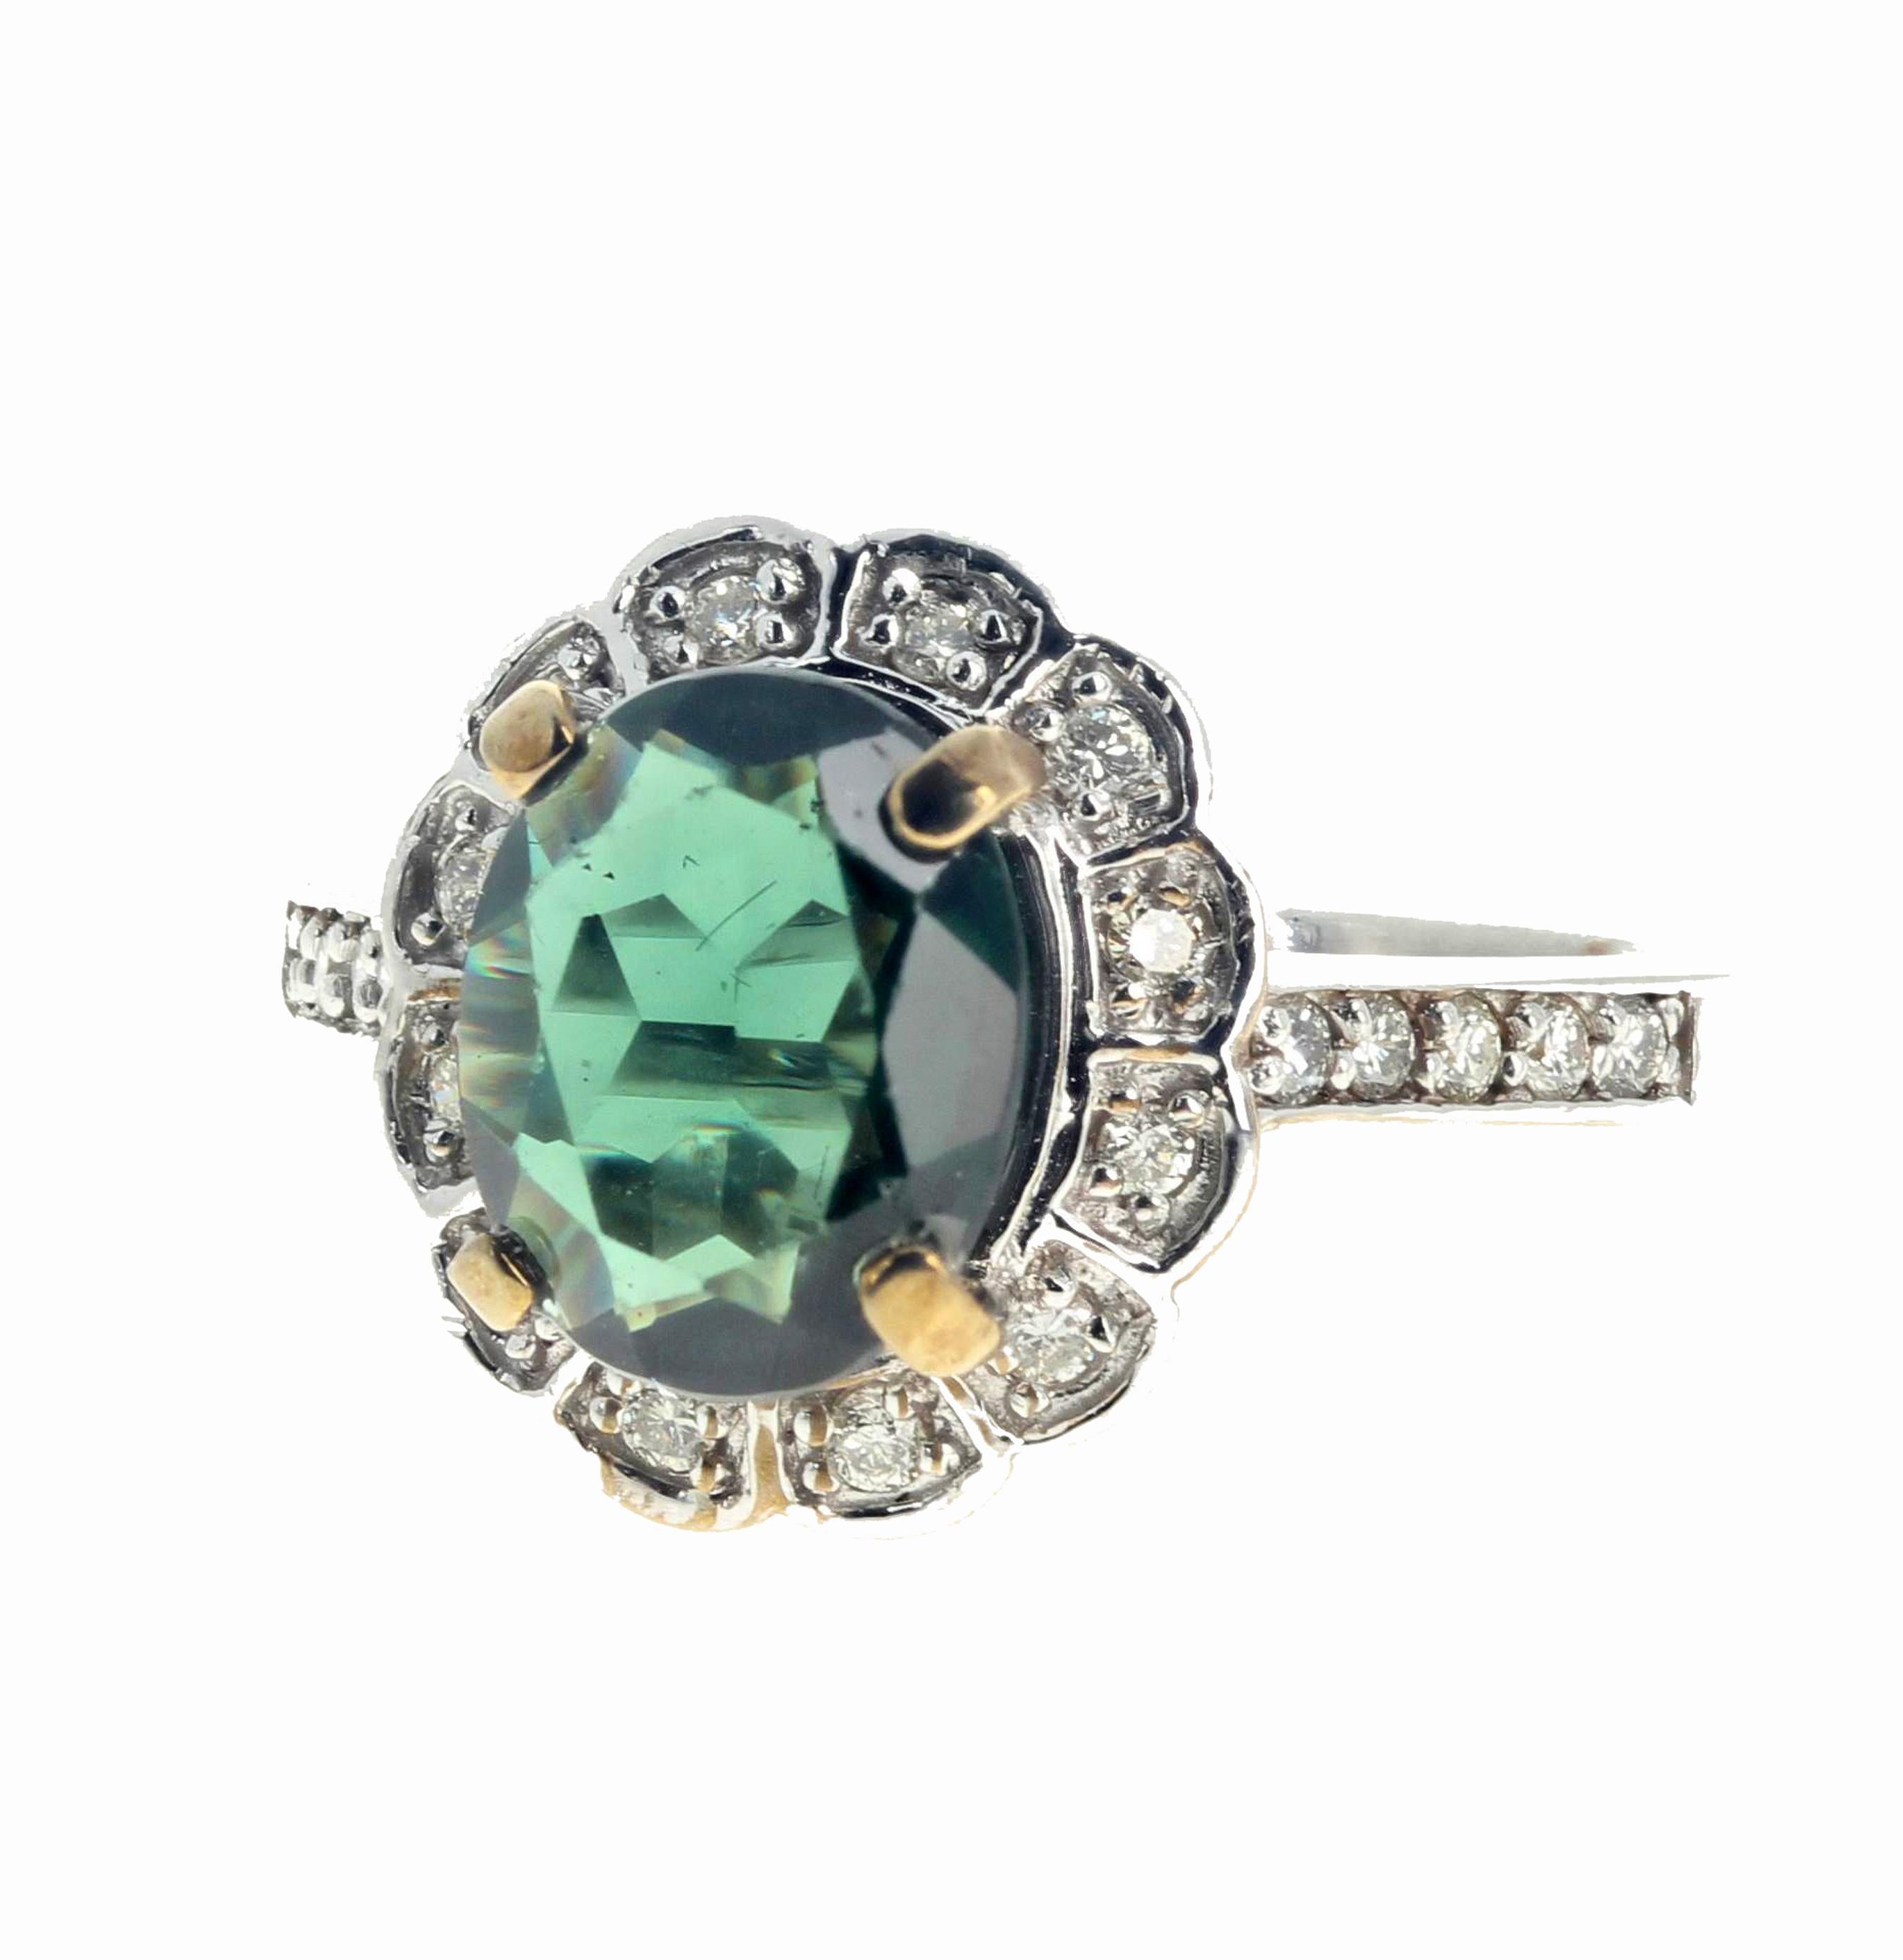 This very intensely green 2.23 carat natural Apatite from Madagascar (10 mm x 8 mm) surrounded by .31 carats of real little round white brilliantly sparkling Diamonds is set in this 14K white gold ring size 7 sizable for free.  